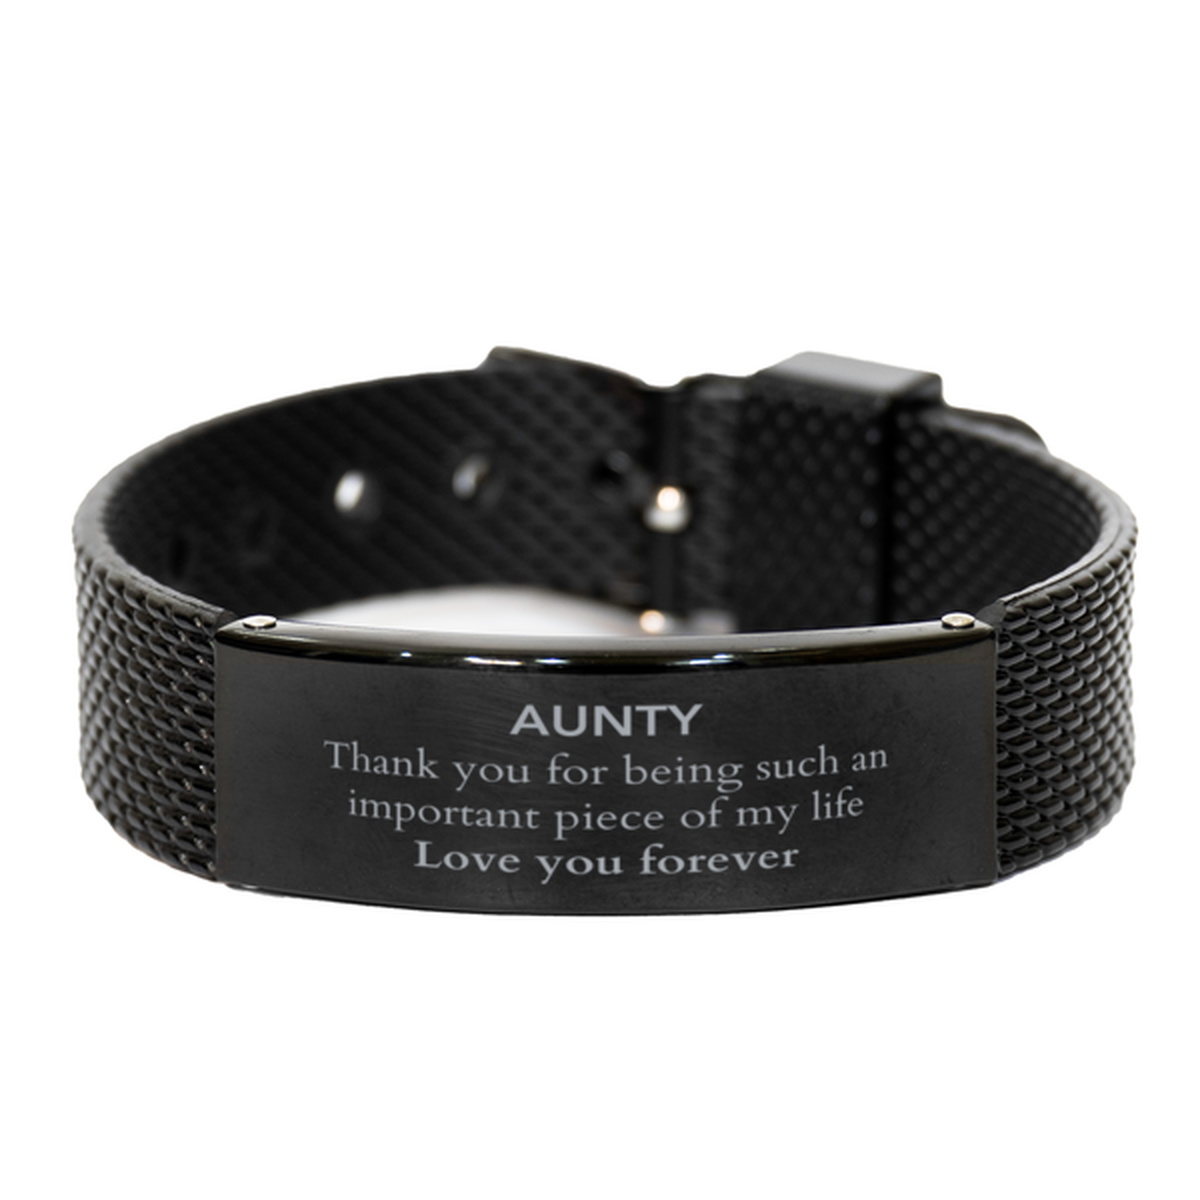 Appropriate Aunty Black Shark Mesh Bracelet Epic Birthday Gifts for Aunty Thank you for being such an important piece of my life Aunty Christmas Mothers Fathers Day